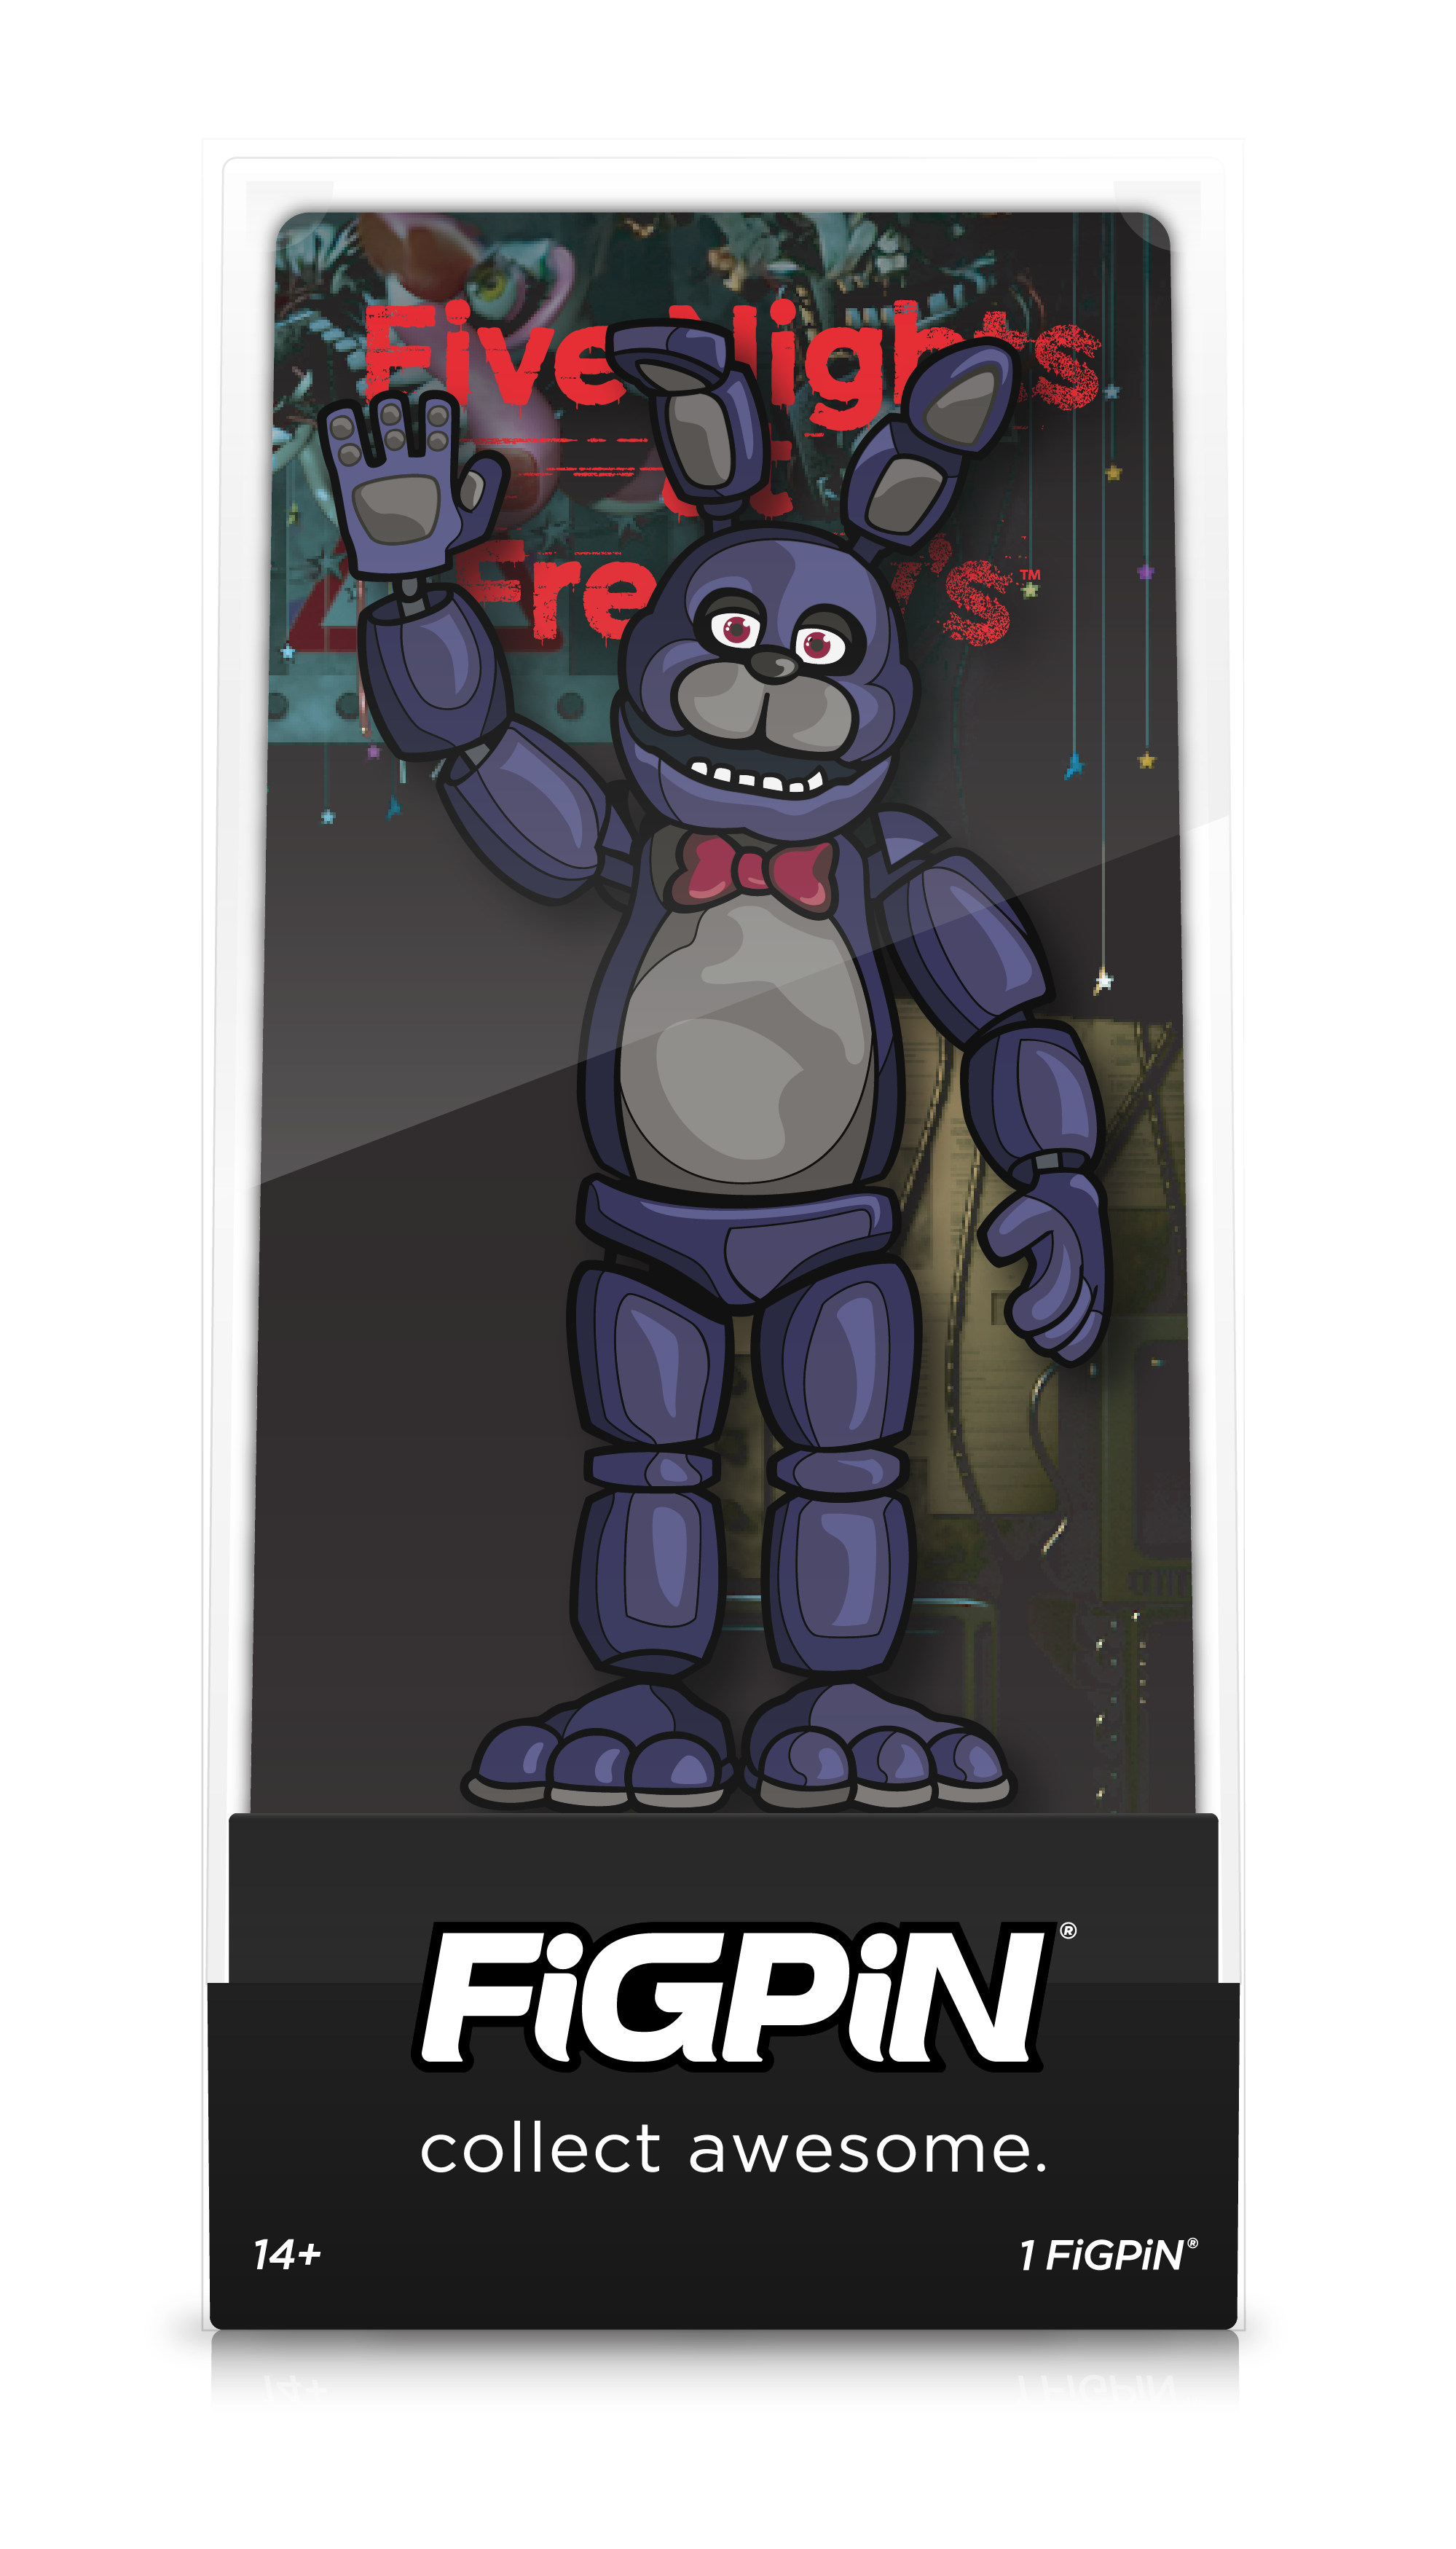 Front view of  Five Nights at Freddy's Bonnie enamel pin inside FiGPiN Display case reading “collect awesome"